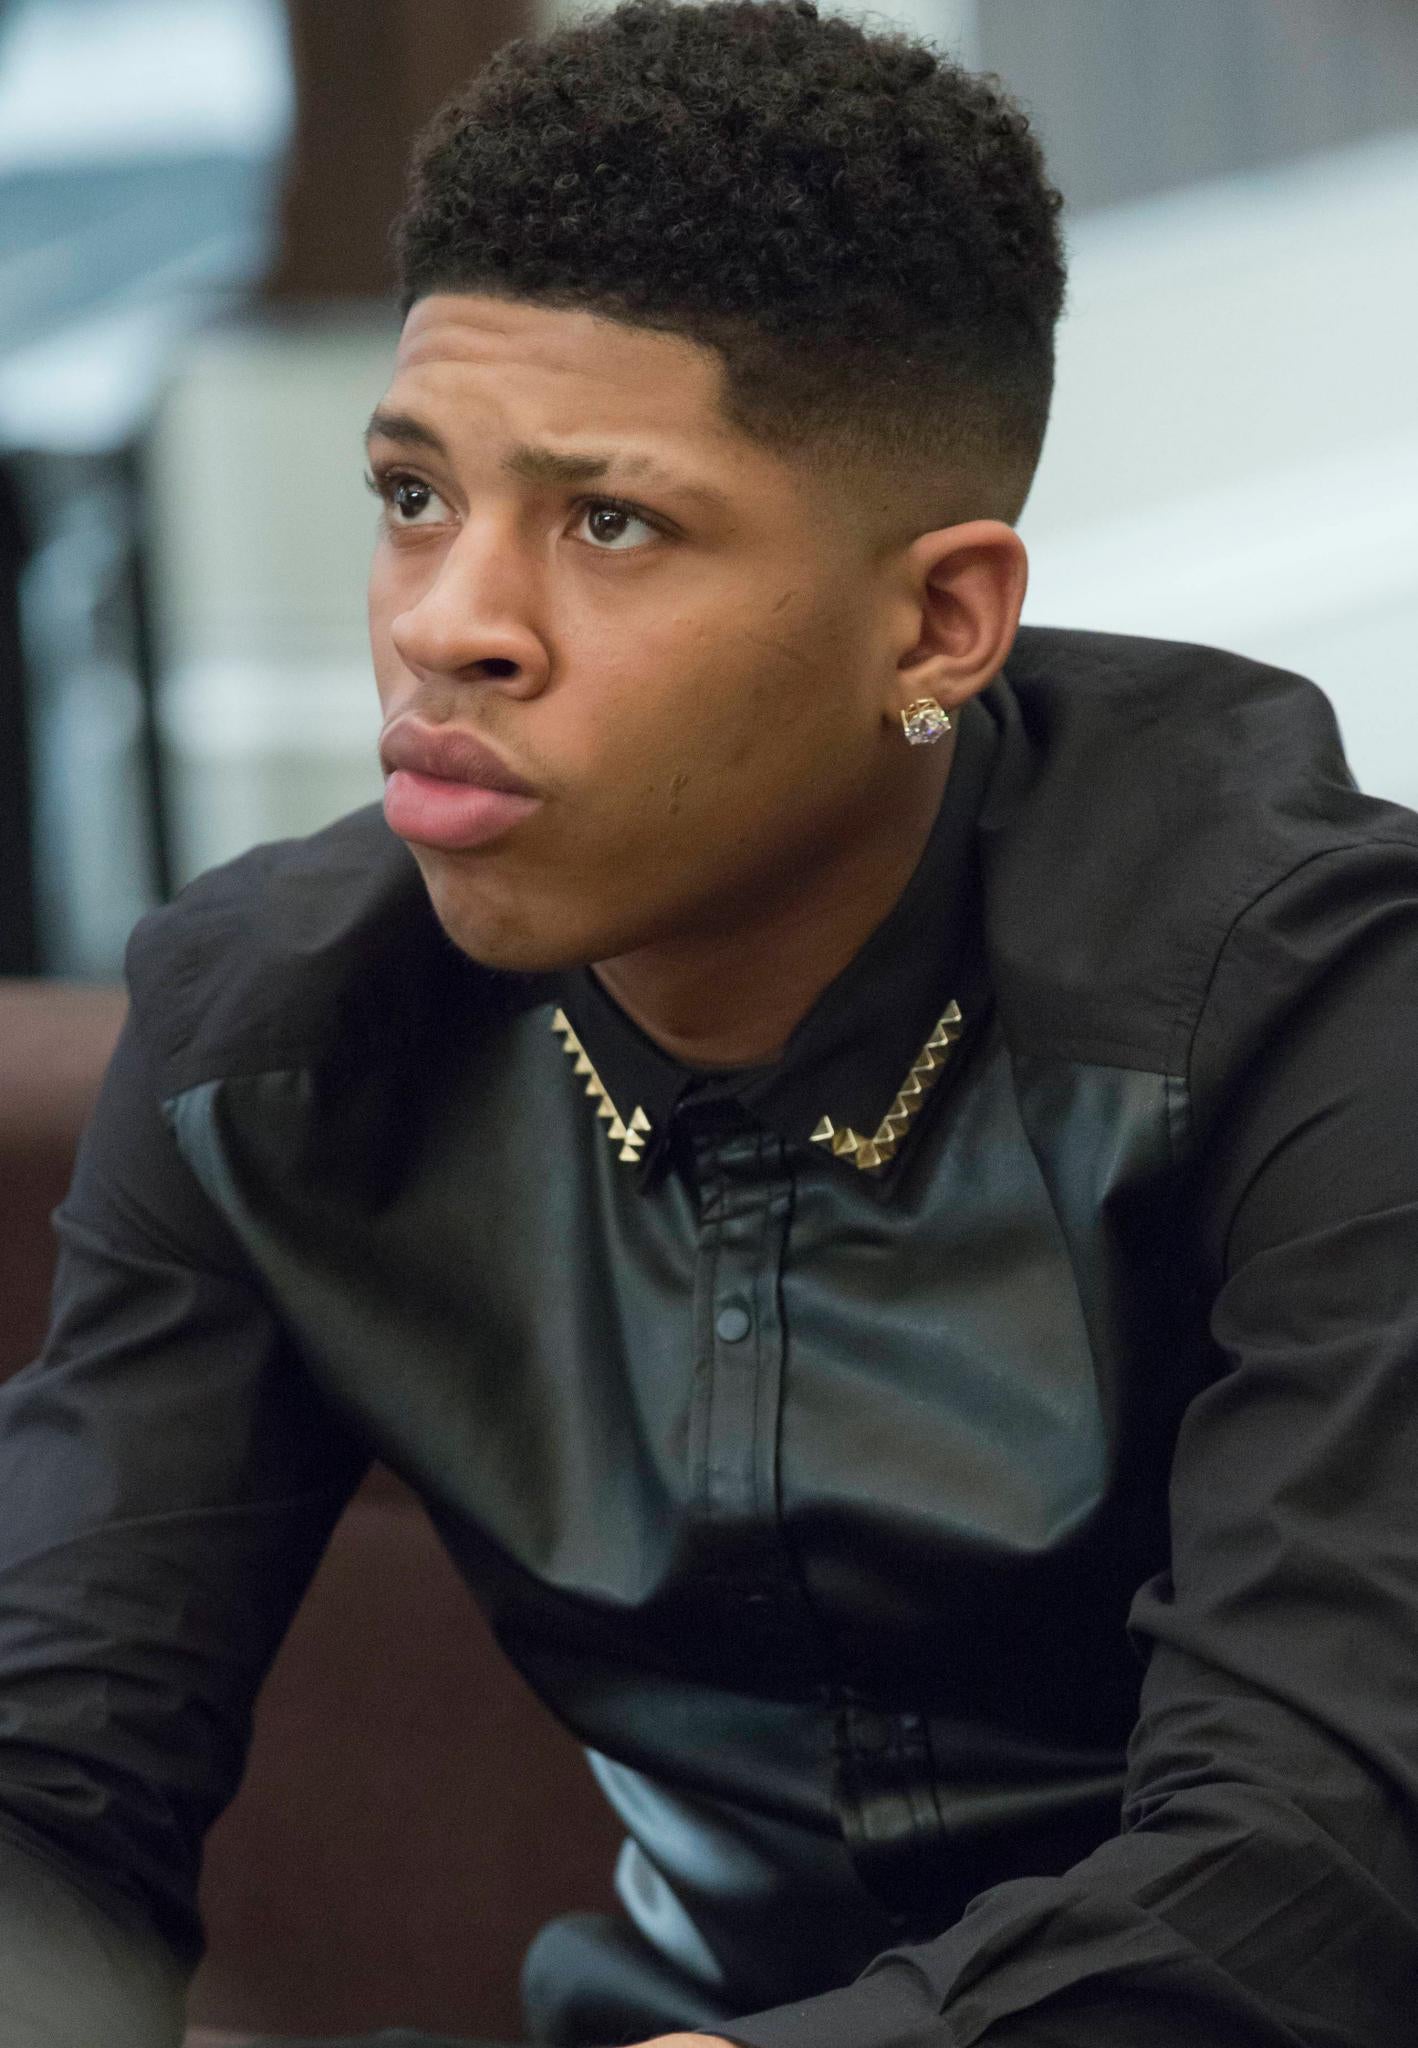 Get a Sneak Peek of Next Week's 'Empire' (You're Welcome)
